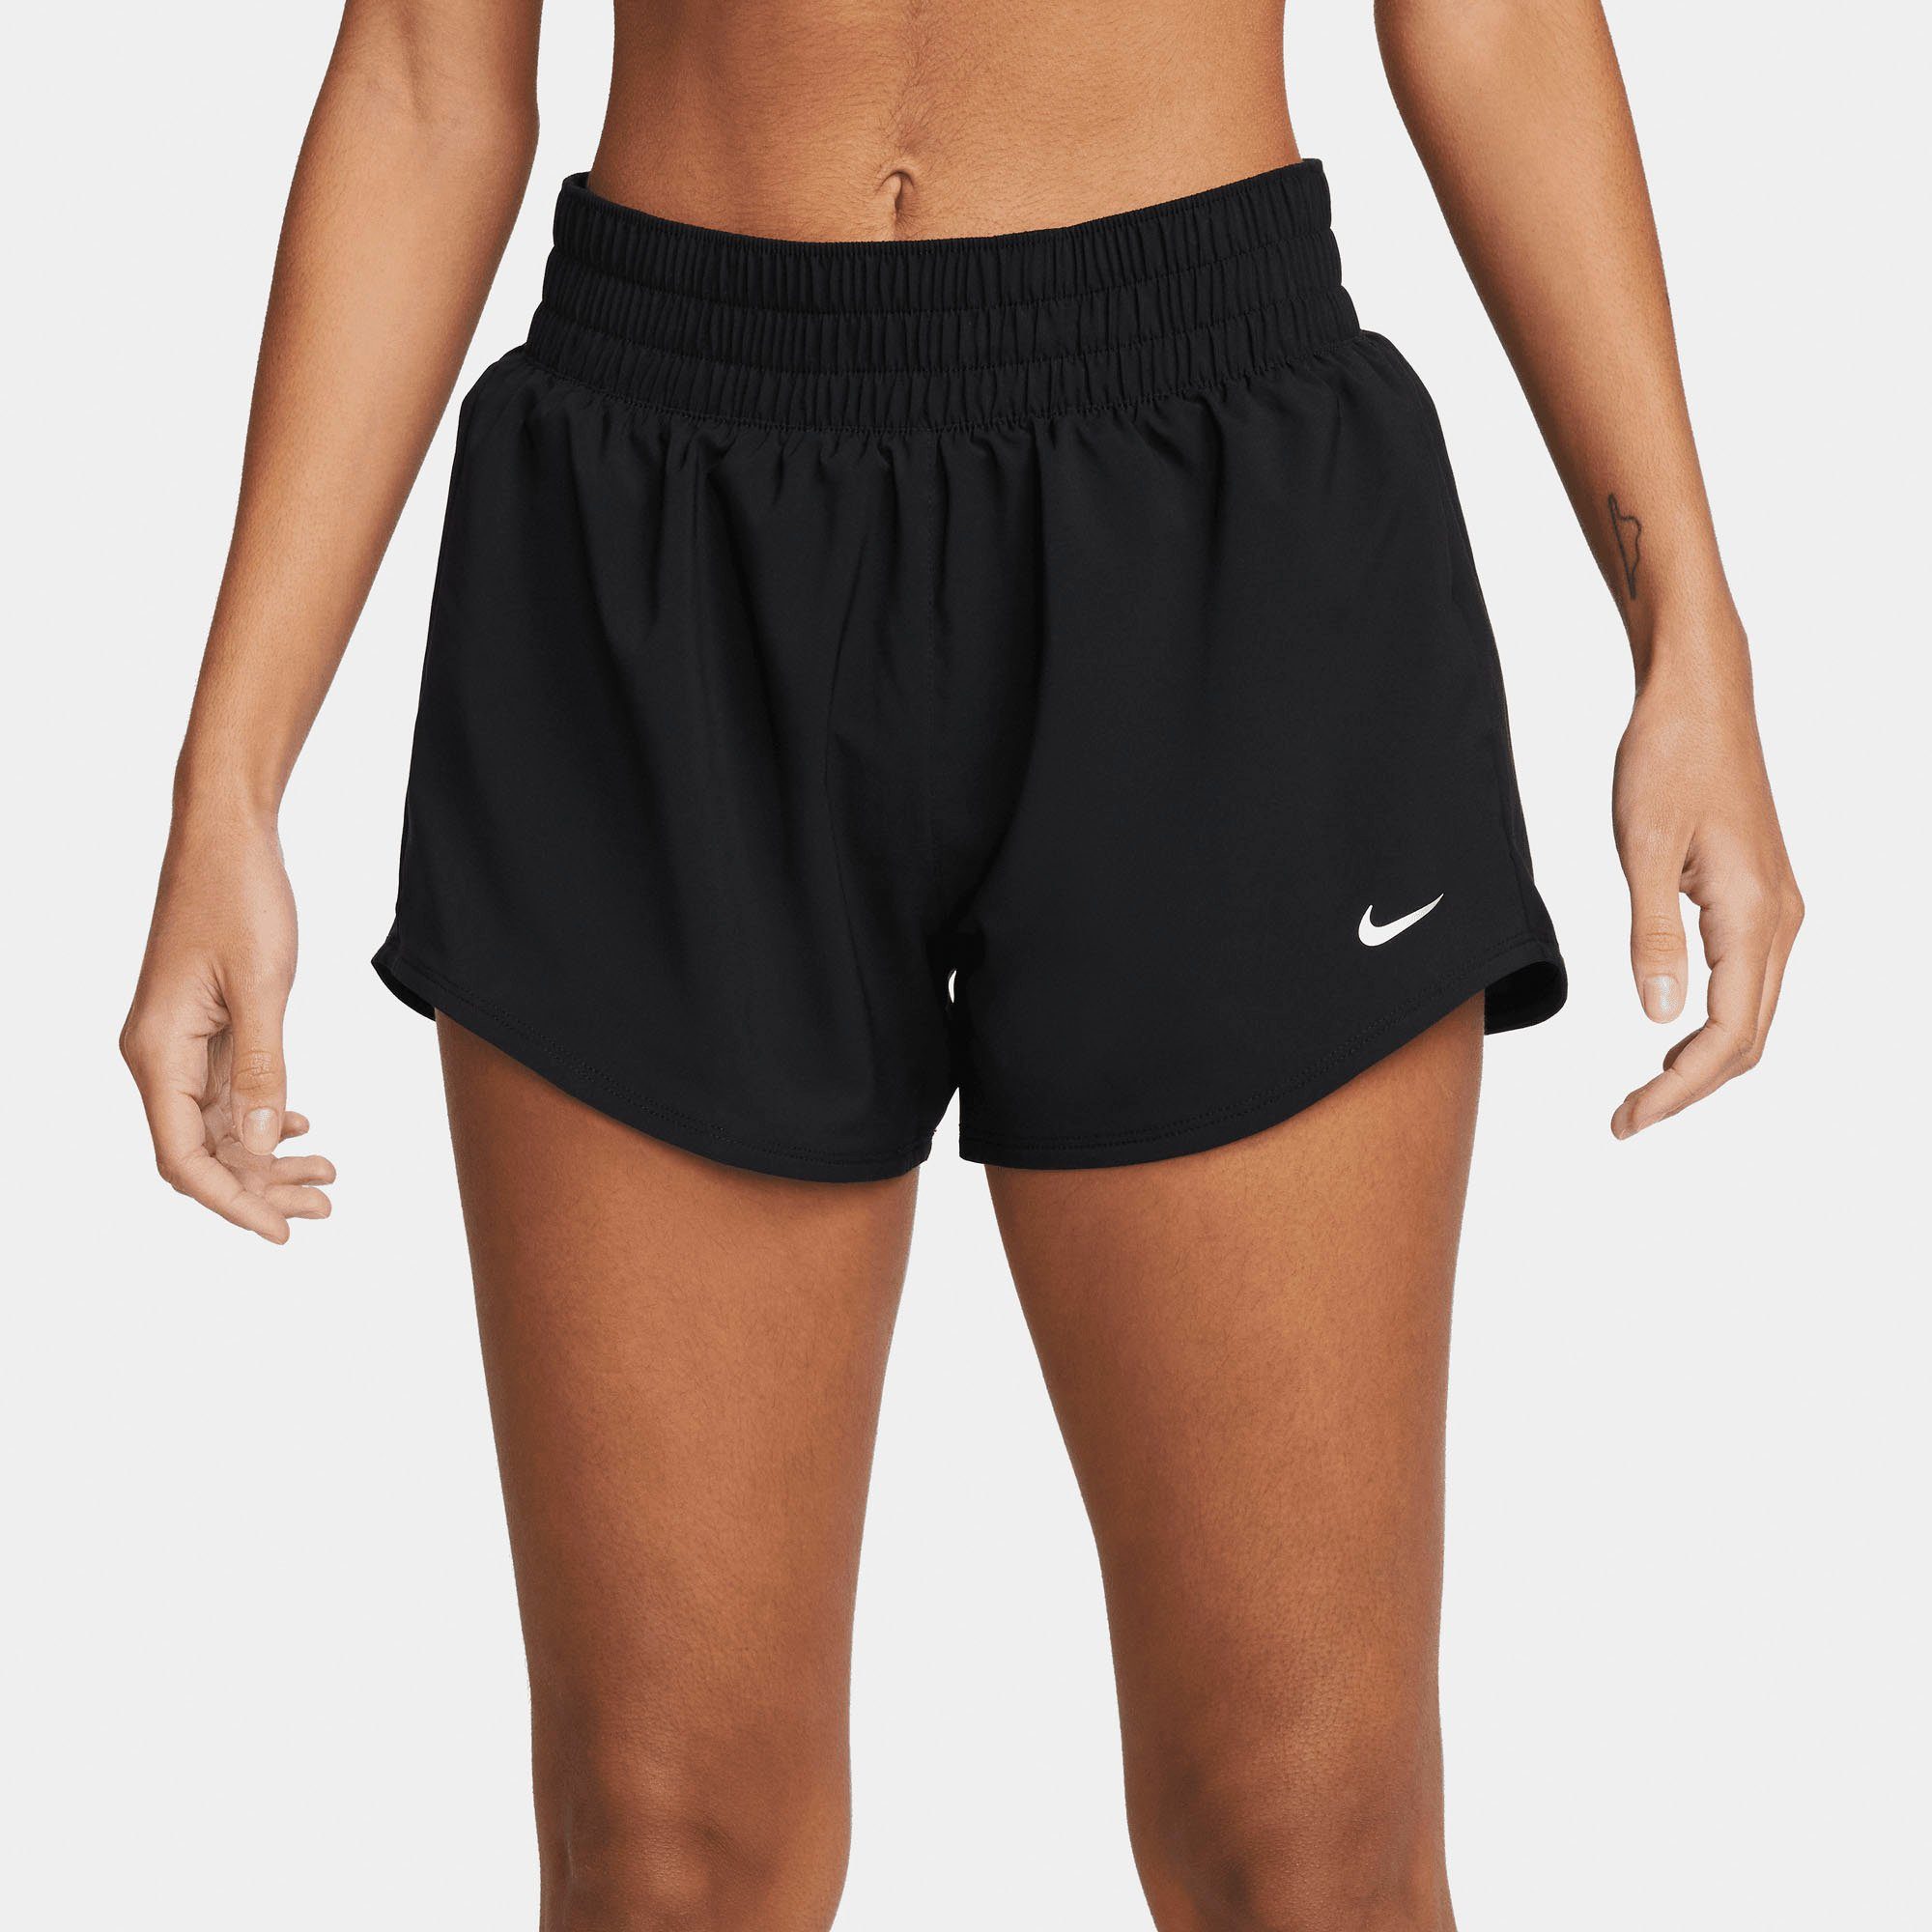 BLACK/REFLECTIVE SHORTS DRI-FIT Nike MID-RISE WOMEN'S Trainingsshorts SILV ONE BRIEF-LINED